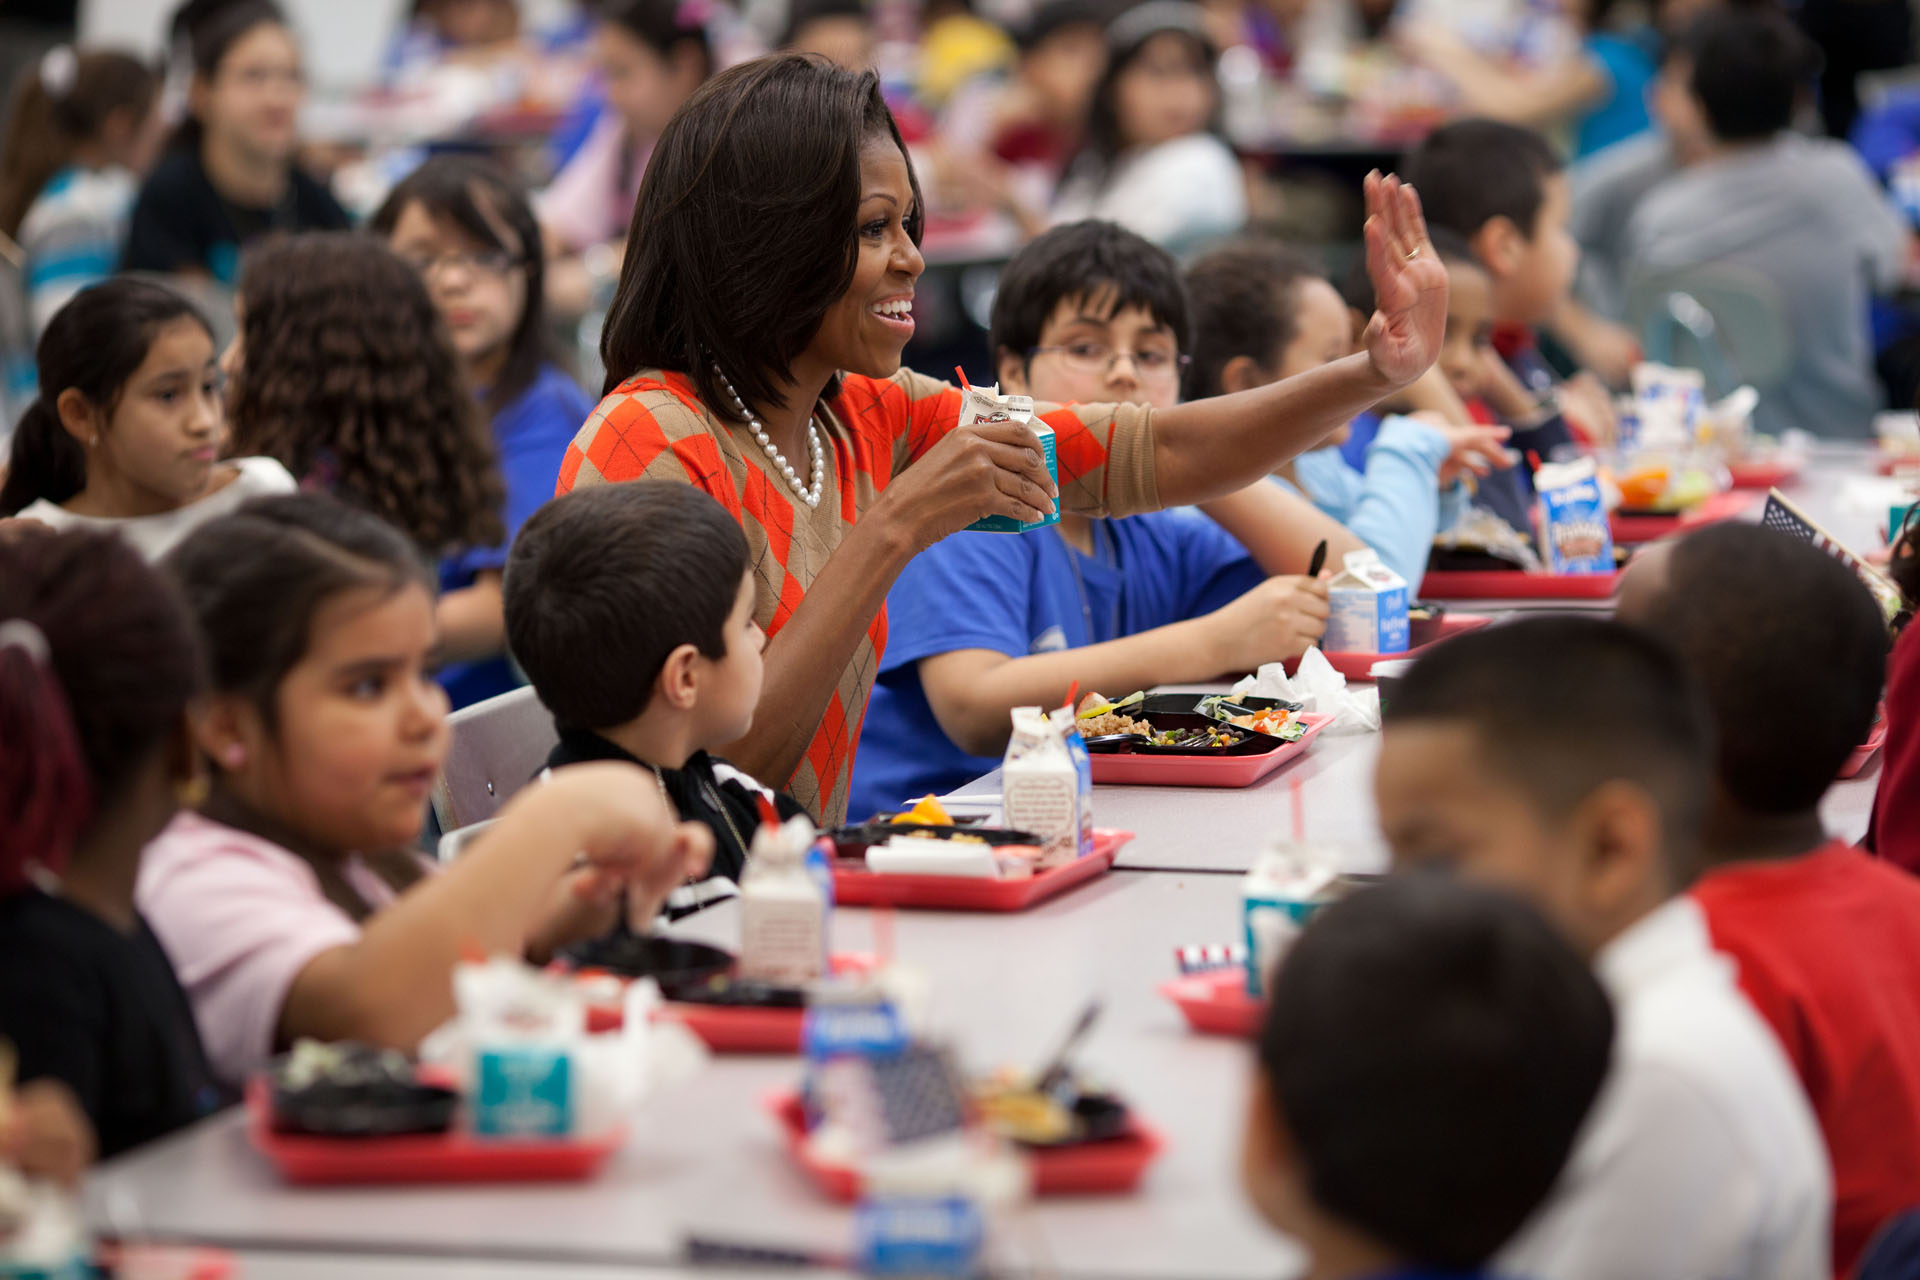 First Lady Michelle Obama eats lunch in a school cafeteria surrounded by children. (Official White House Photo by Chuck Kennedy)